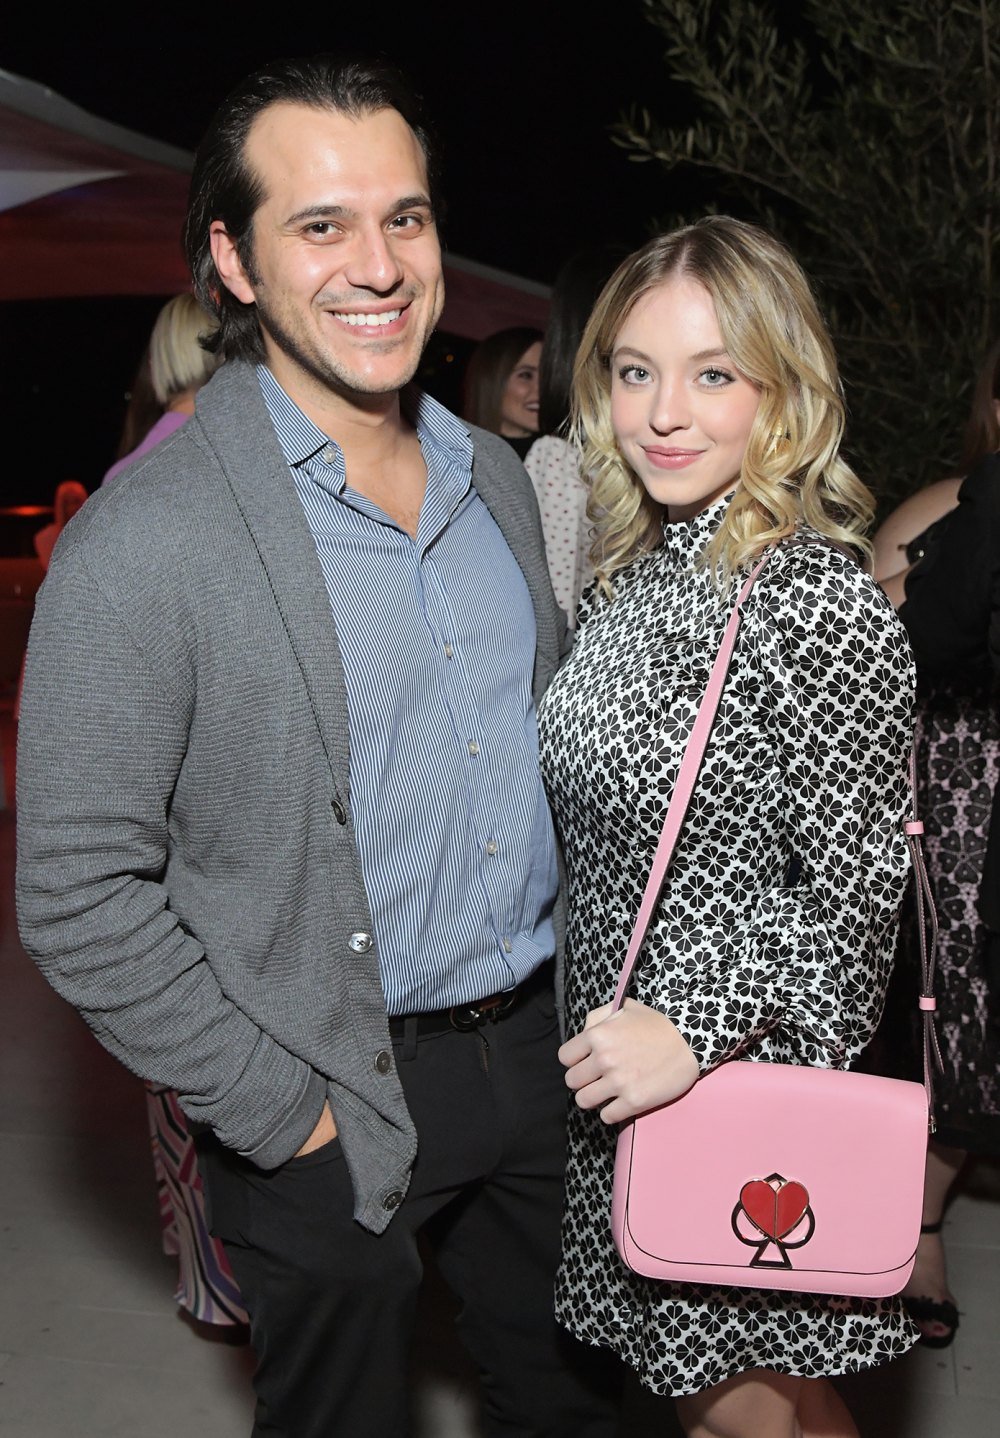 Sydney Sweeney's Fiance Jonathan Davino Joins Her for 'SNL' Afterparty After Monologue Shout-Out